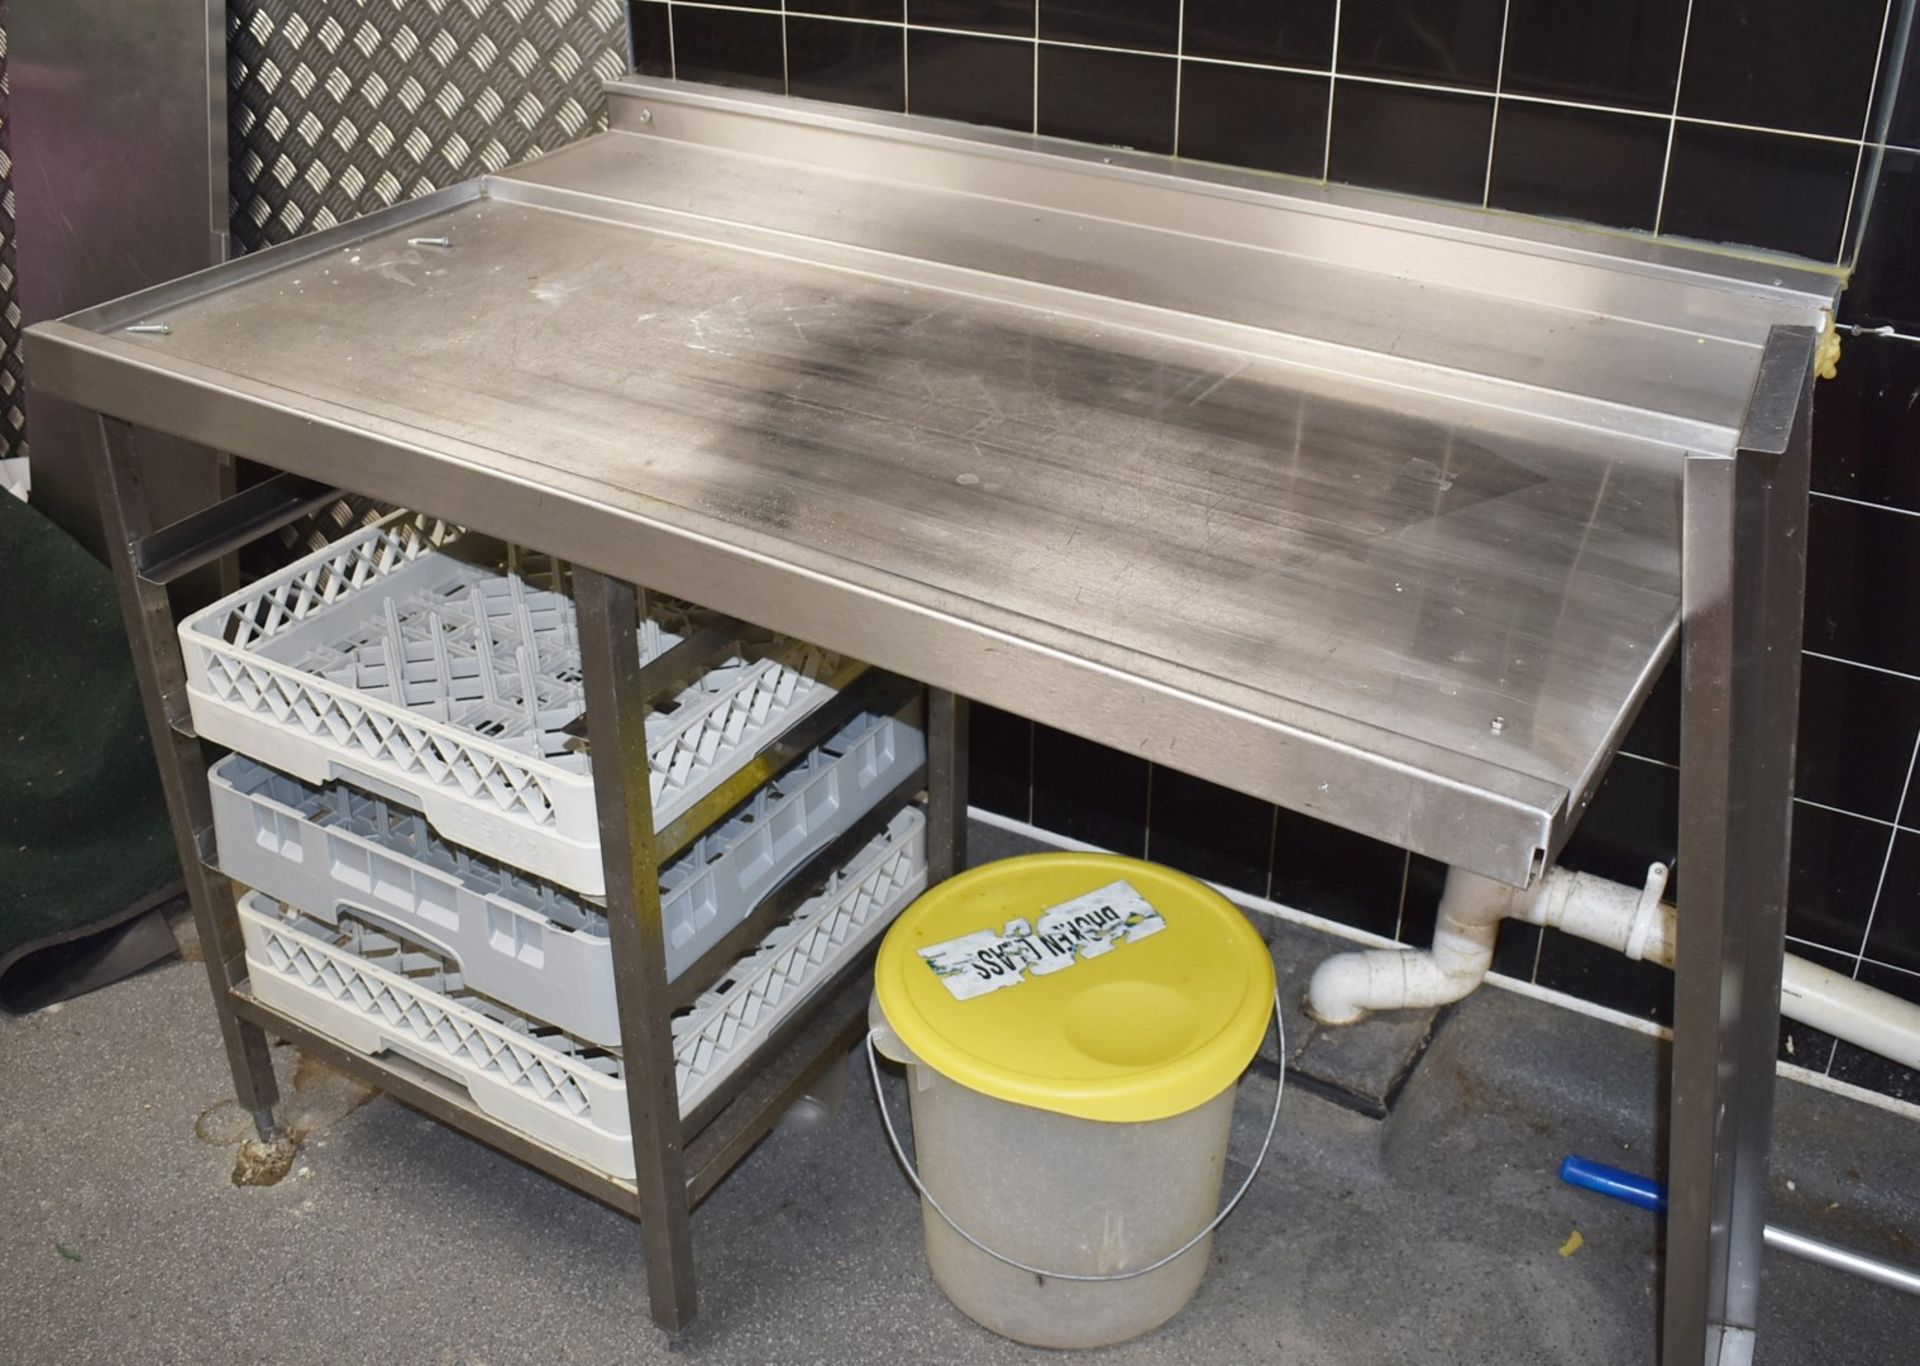 1 x Commercial Stainless Steel Passthrough Inlet and Outlet Tables With Wash Basin and Spray Hose - Image 6 of 6